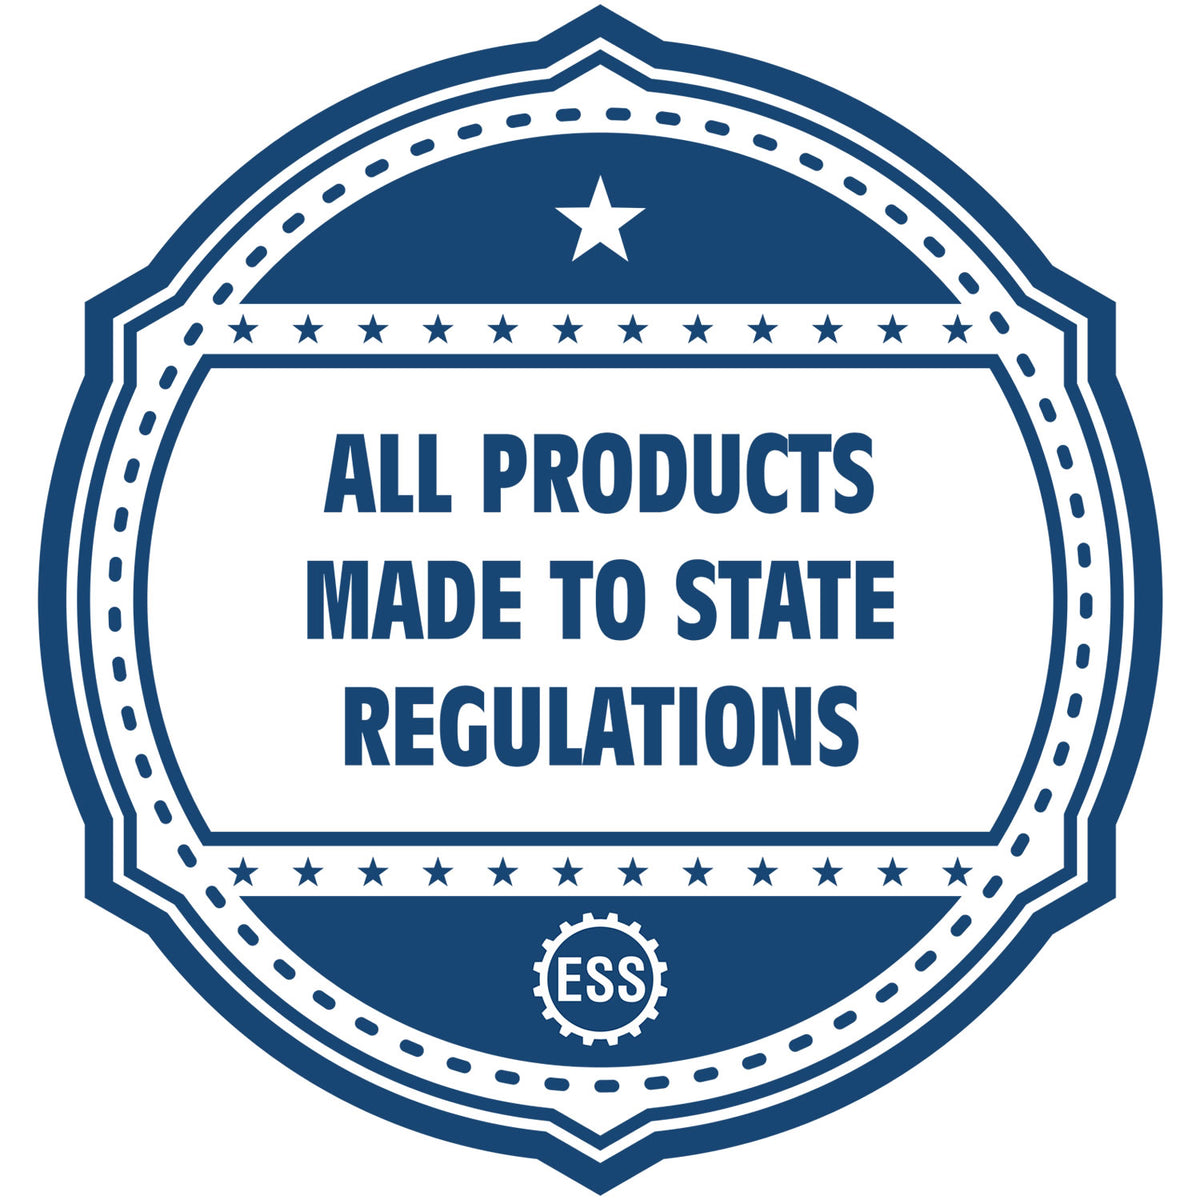 An icon or badge element for the Self-Inking State Seal Arizona Notary Stamp showing that this product is made in compliance with state regulations.